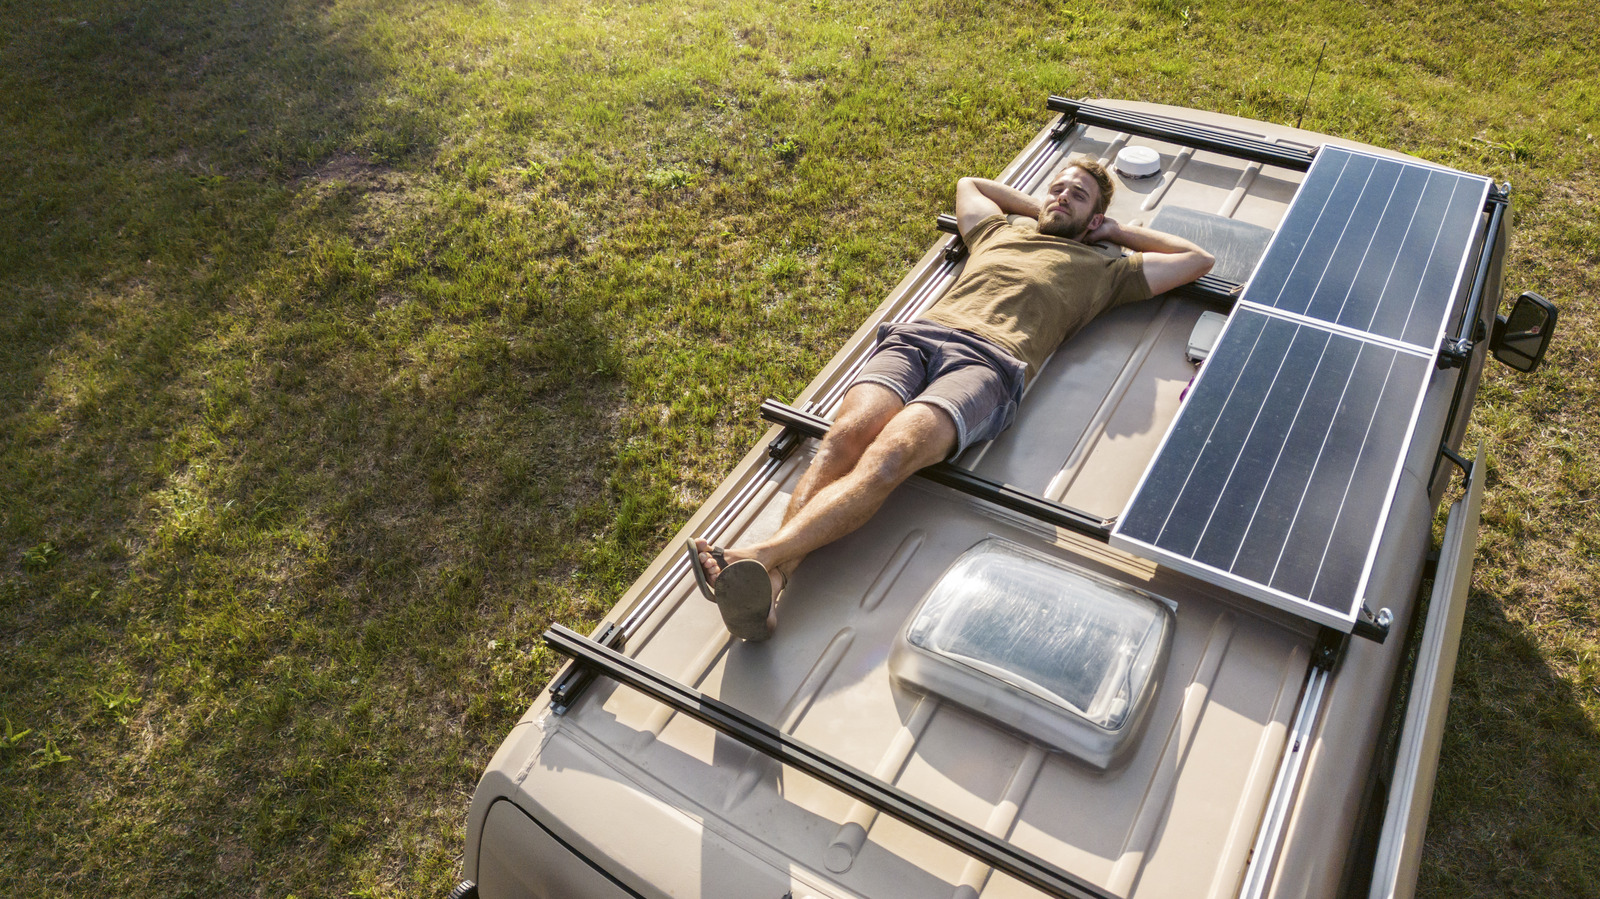 How Many Solar Panels Does It Take To Power An RV / Motorhome? 